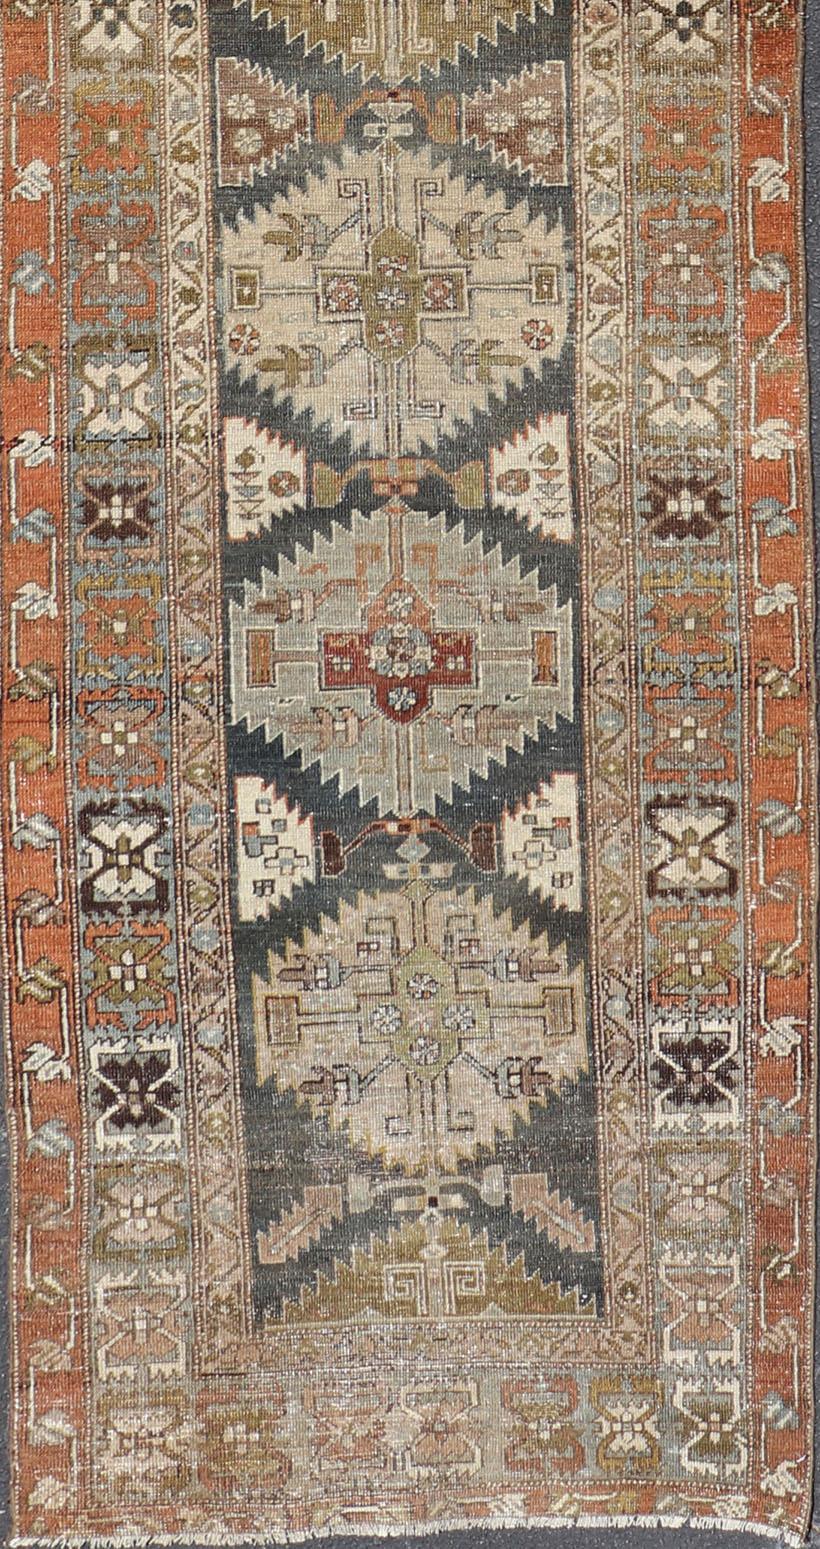 Heriz Searpi runner with multi-medallion and geometric design from Persia, rug/R20-0808 country of origin / type: Iran / Karadjeh, circa 1910

Measures:3 x 13'8

This magnificent Persian Searpi-Heriz bears an exquisite design rendered in variety